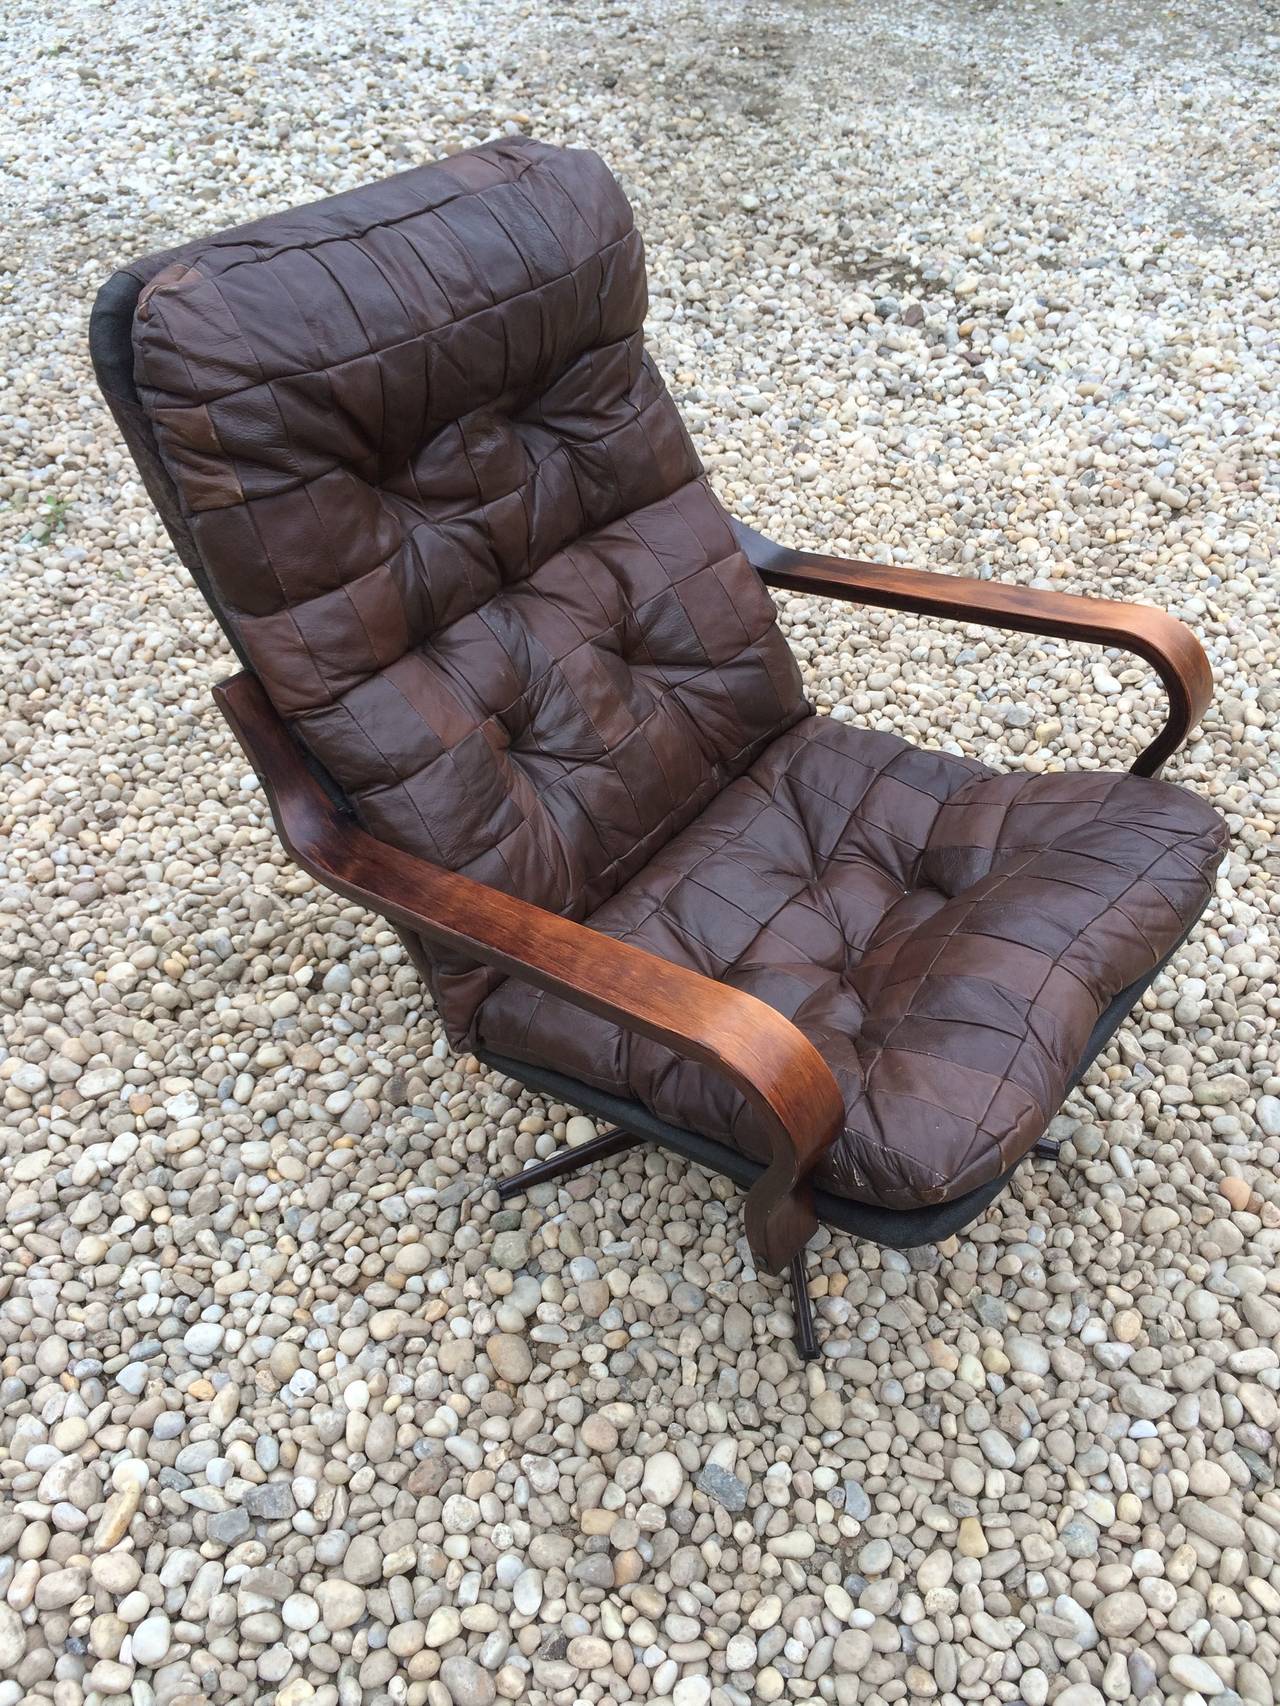 1970s patchwork leather swivel chair (pair available upon request)